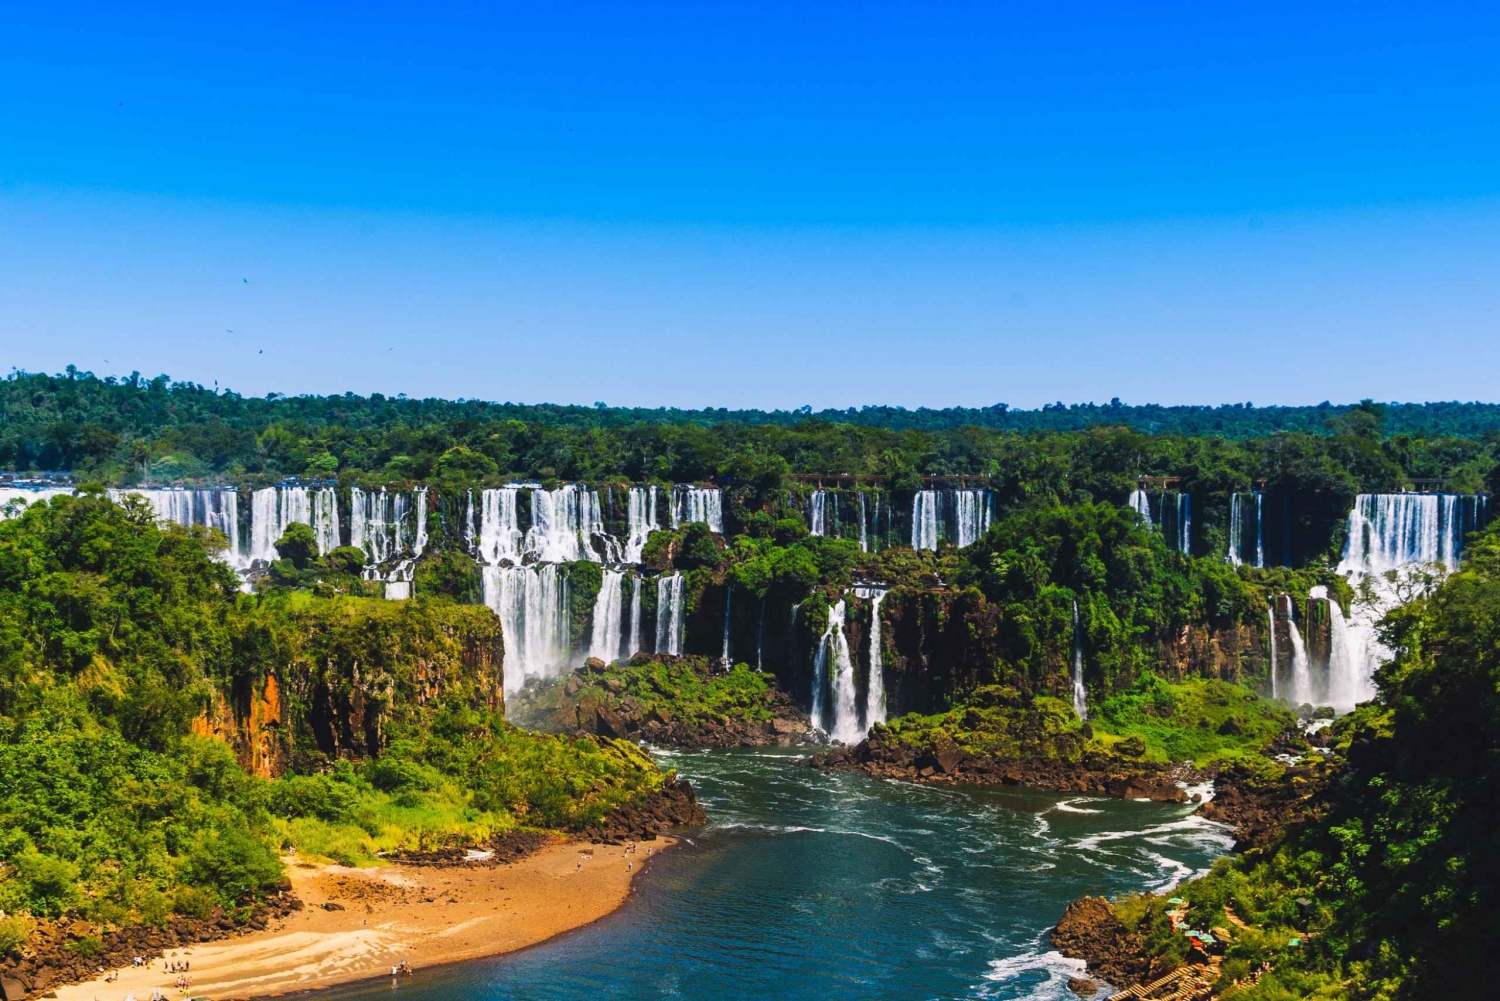 Iguazu Falls Private Day Trip from Buenos Aires